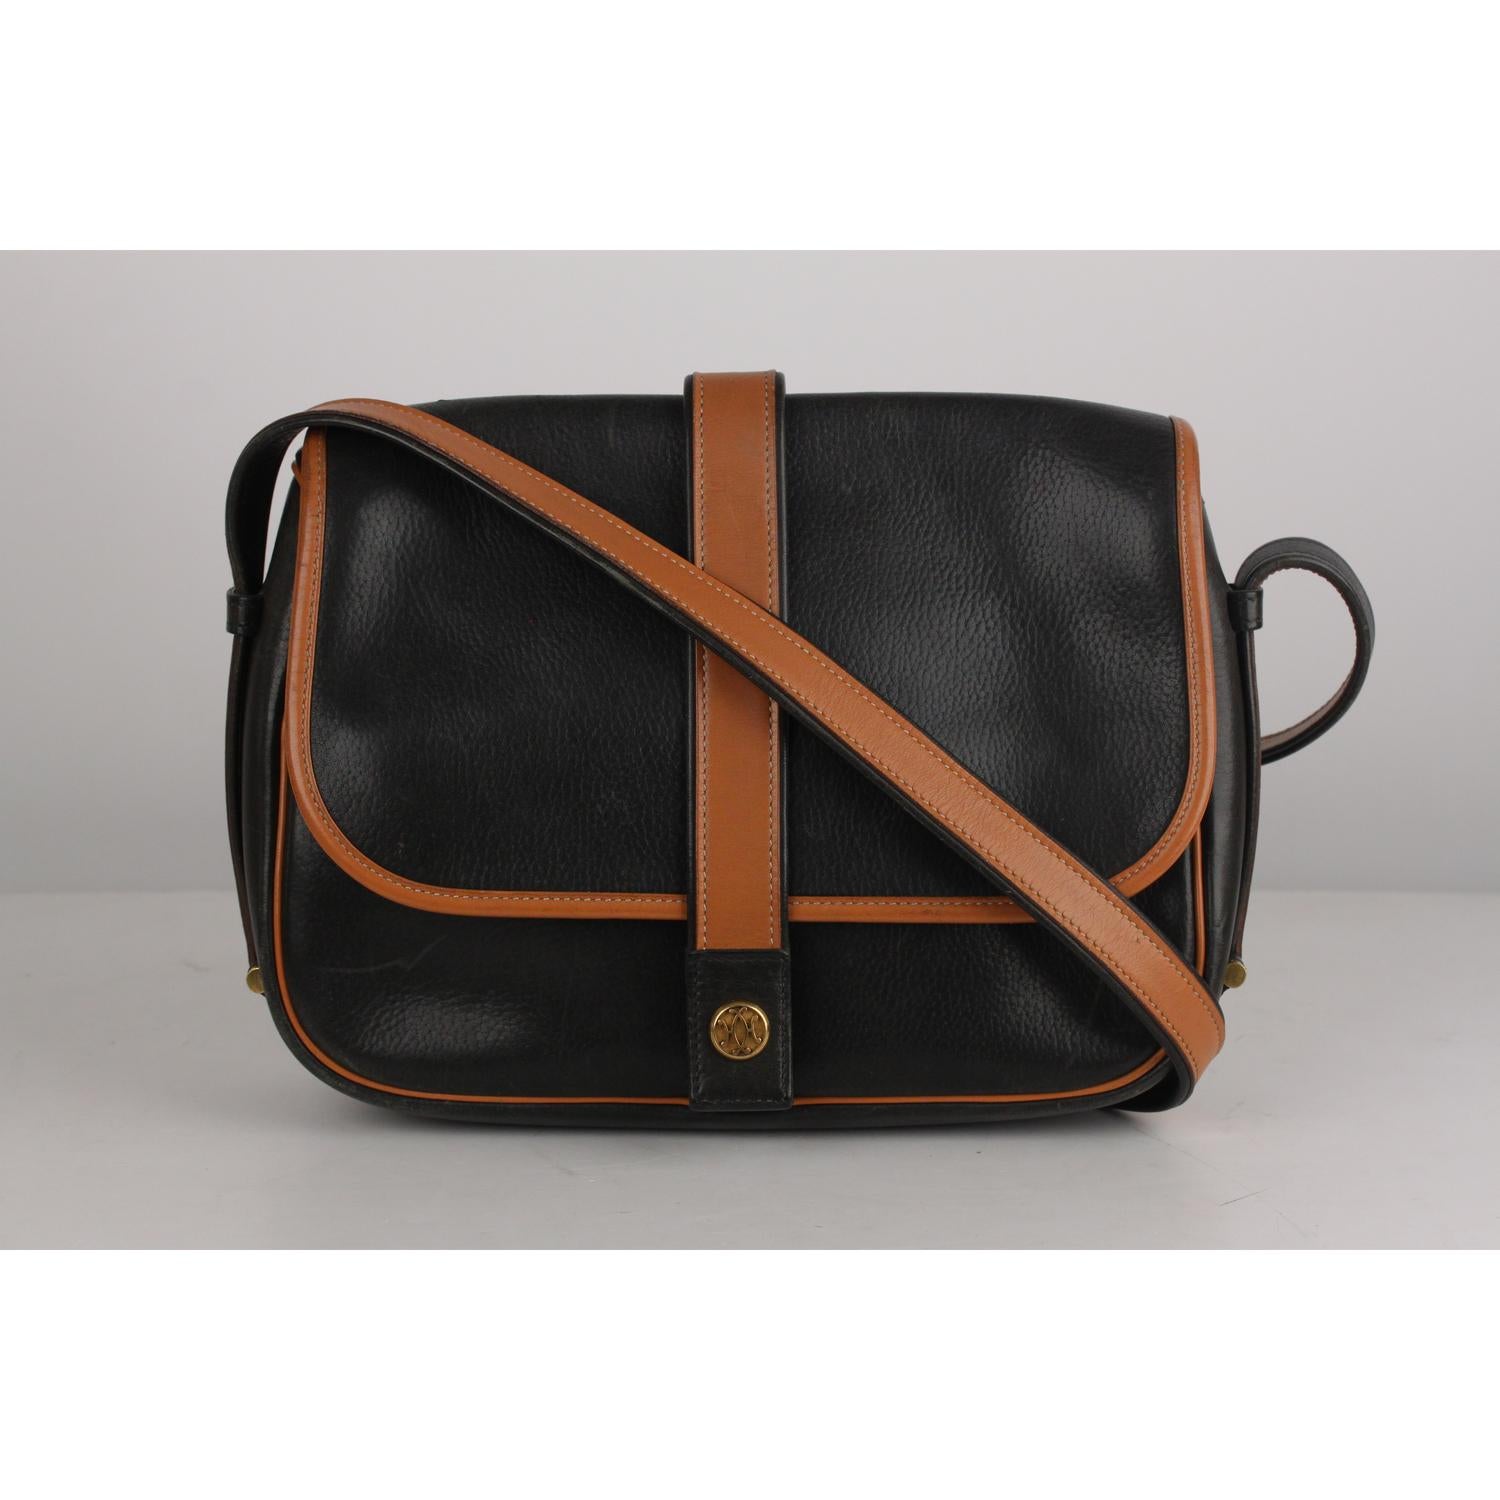 Vintage Hermes 'Noumea'  Messenger bag with bicolor design. Black and genuine leather. The bag features a leather shoulder strap, Flap with a fold-over strap and button closure, and open pocket under the flap, a rear zip pocket, and beige fabric